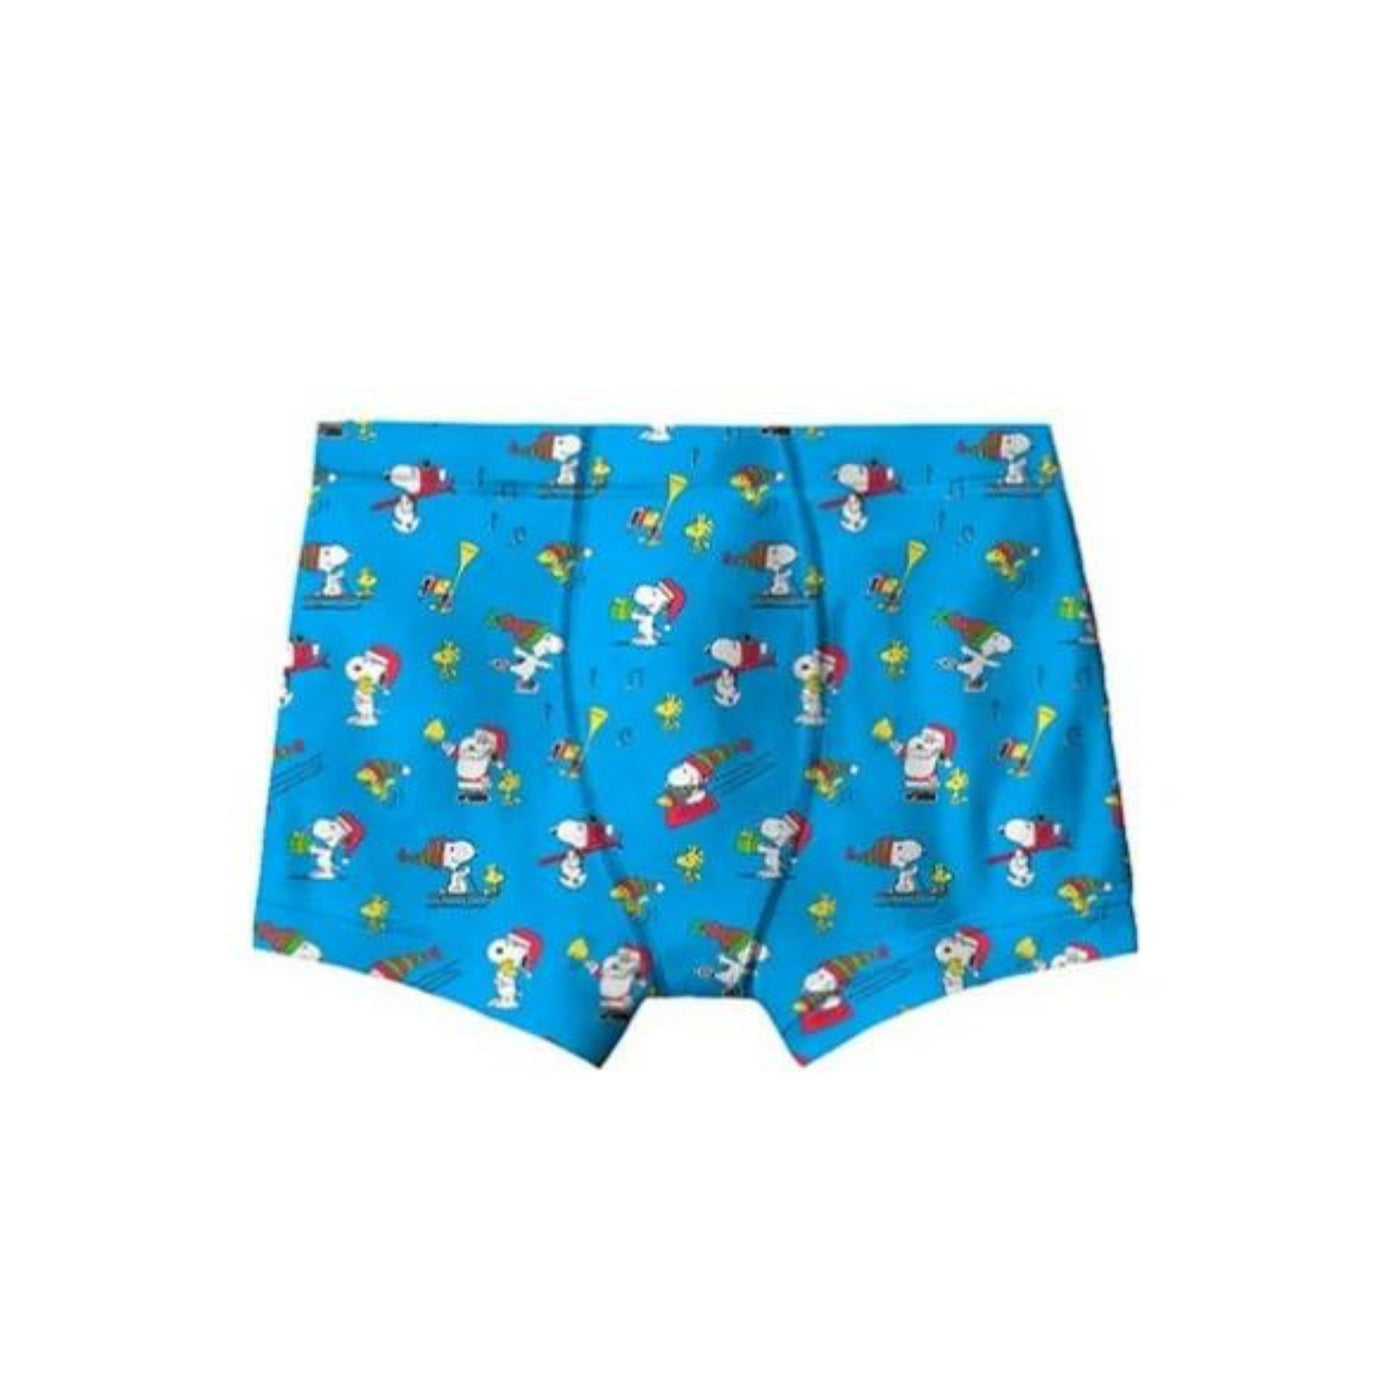 Men's cotton boxer with Snoopy pattern